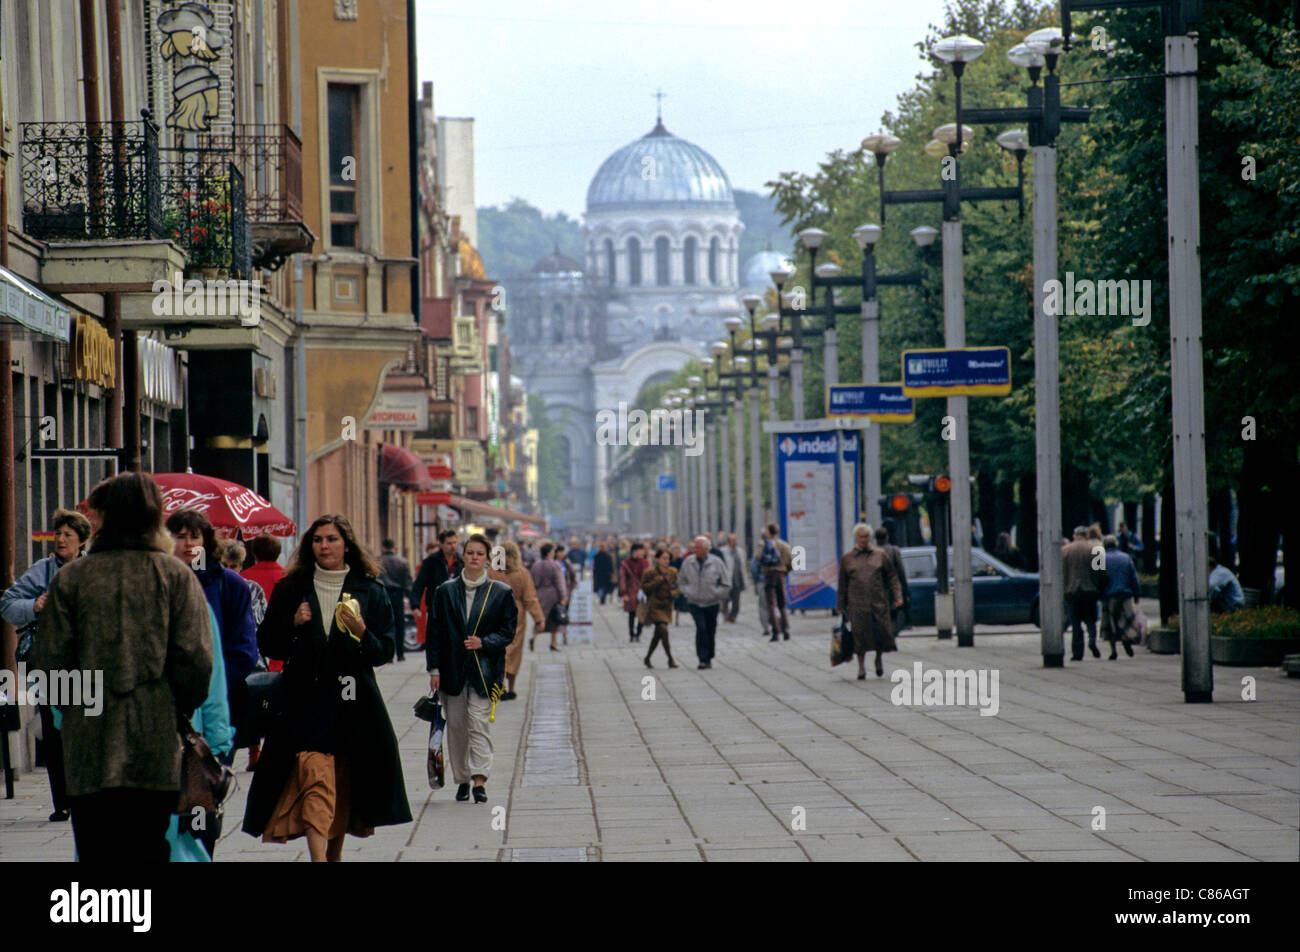 Kaunas, Lithuania. People walking on the street with row of lampposts, the Russian Orthodox Church in the centre. Stock Photo